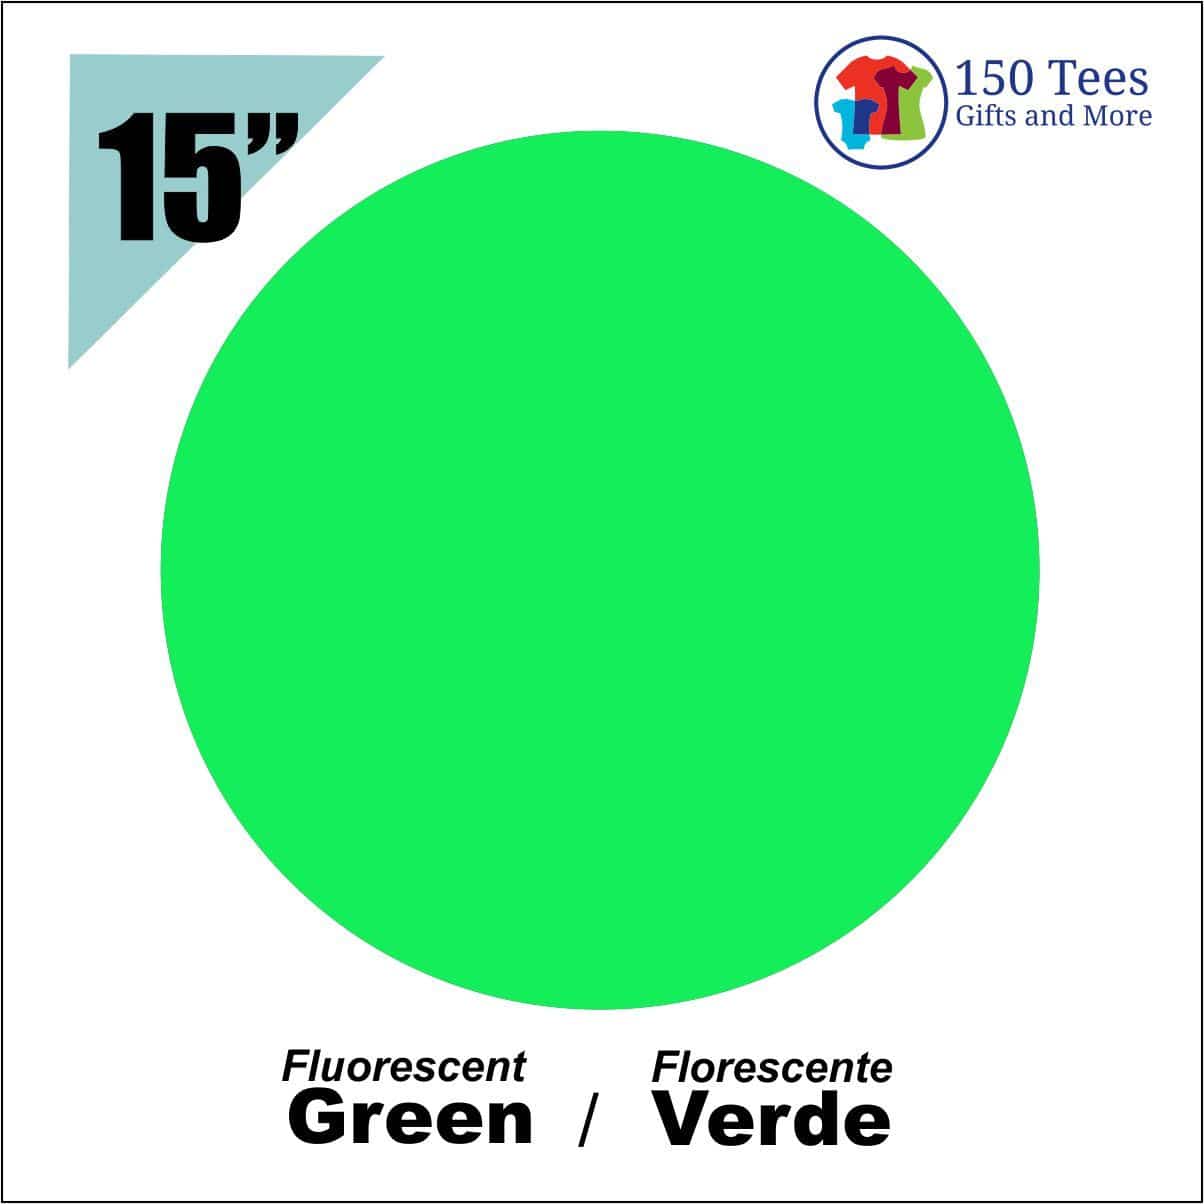 Siser EasyWeed Fluorescent HTV 15" - Green - 150 TEES GIFTS & MORE